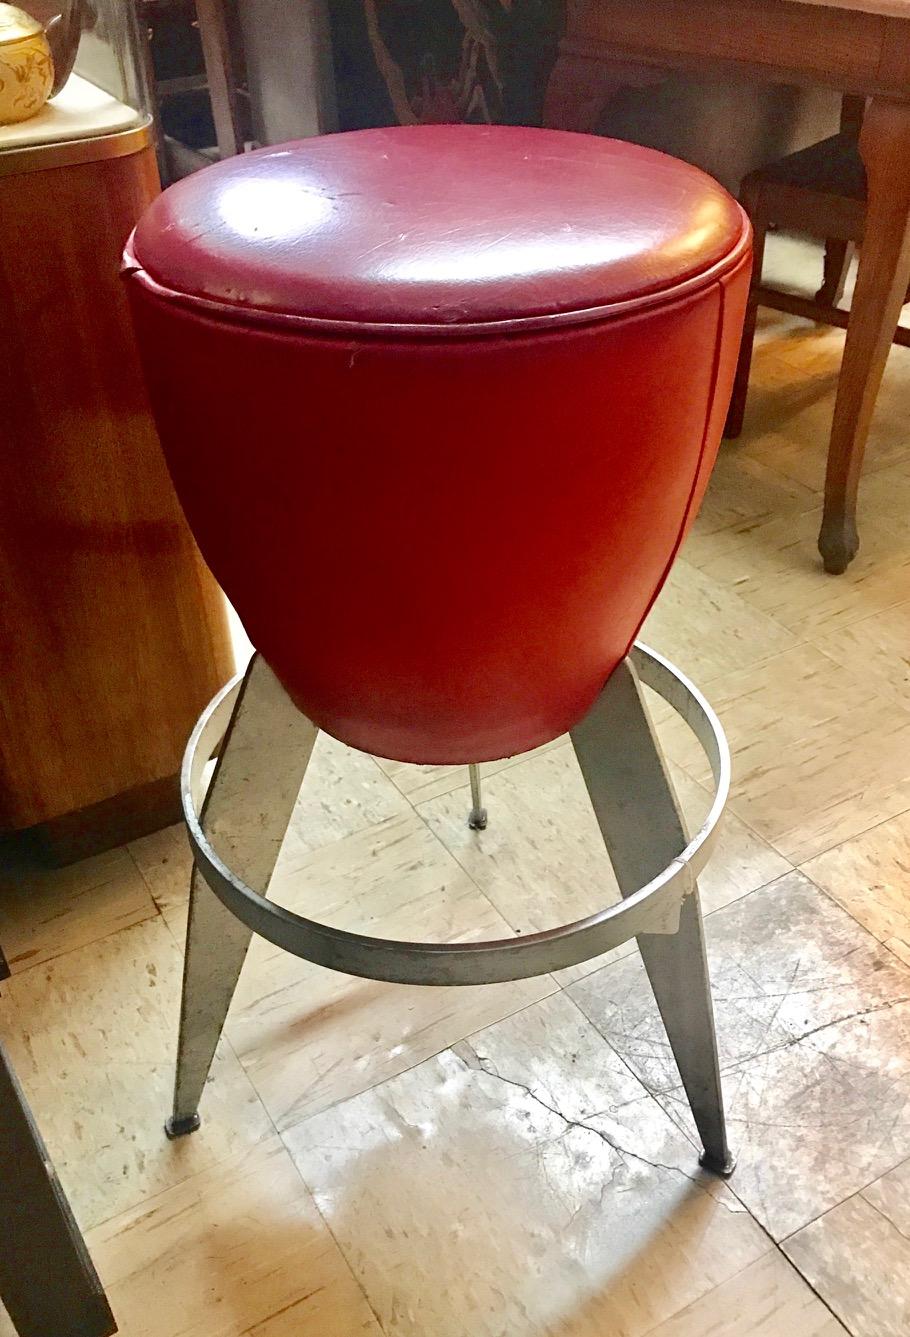 Ten Swedish stools by Johanson Design. Stools have red vinyl seats with metal frames.